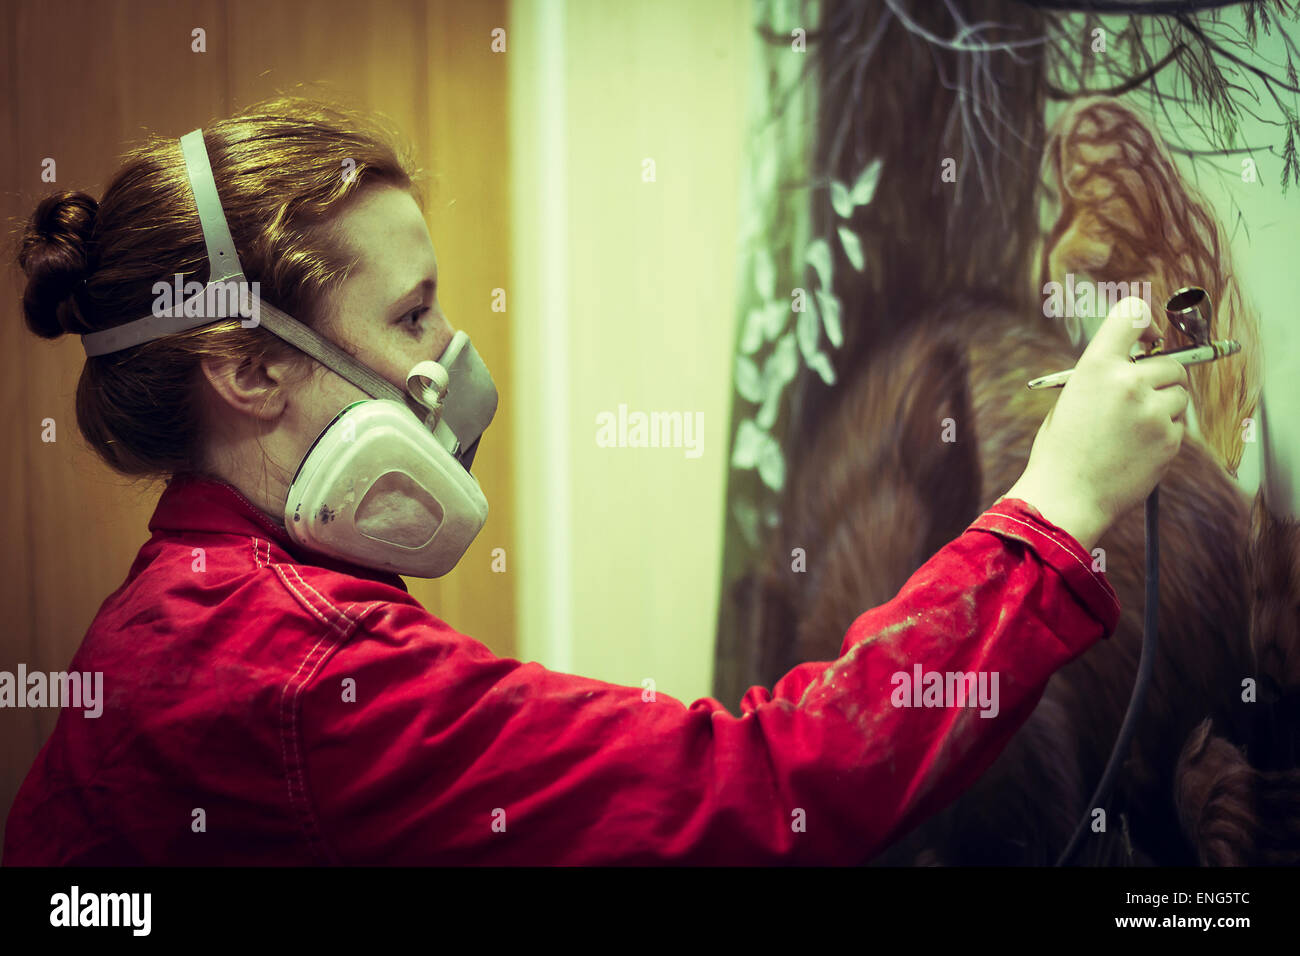 Artist in gas mask airbrushing painting in studio Stock Photo